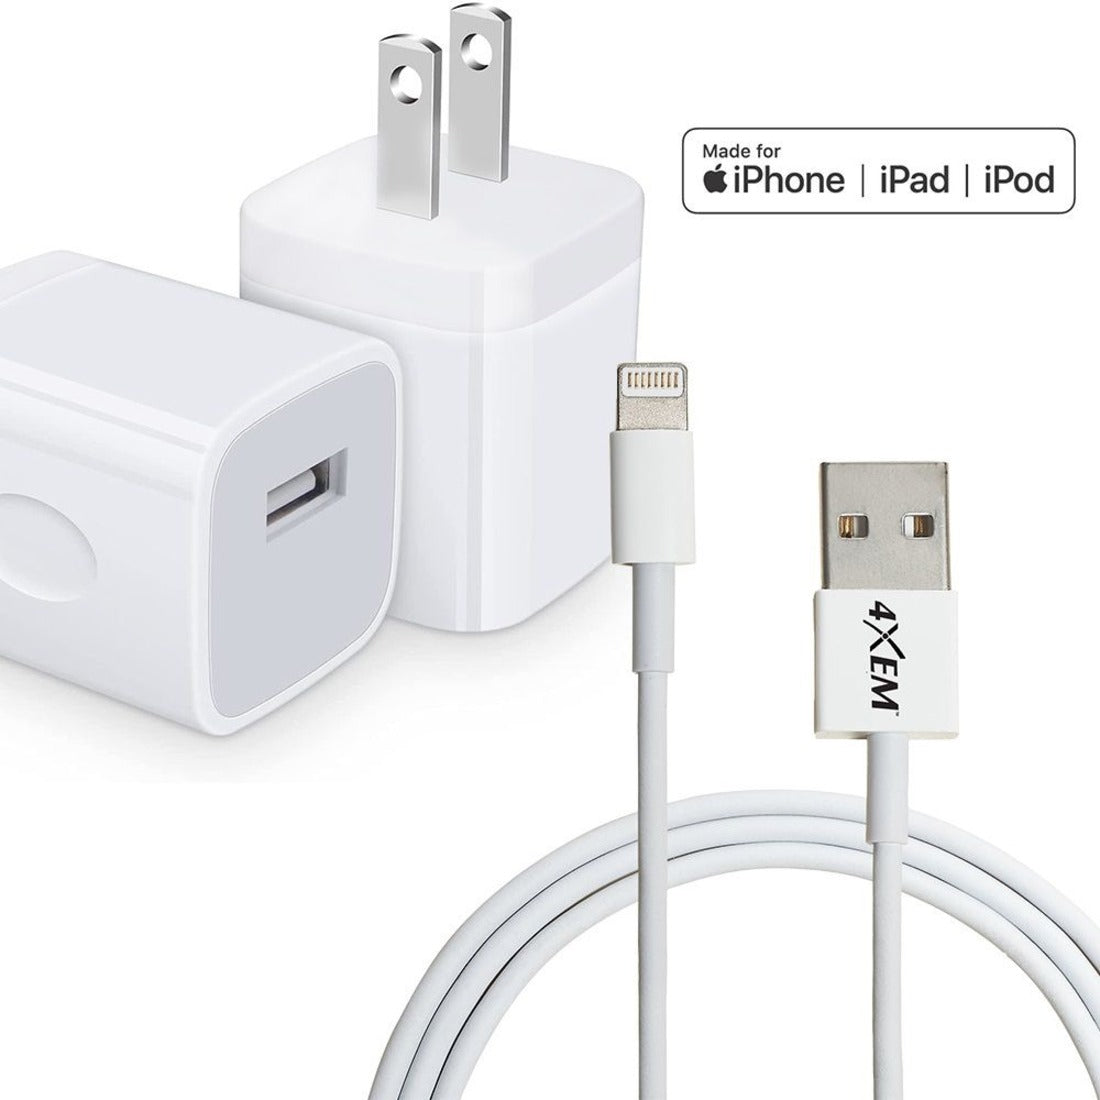 4XEM iPhone/iPod Charging Kit - Apple Charger and 3ft Lightning 8 Pin Cable - MFi Certified SpadezStore